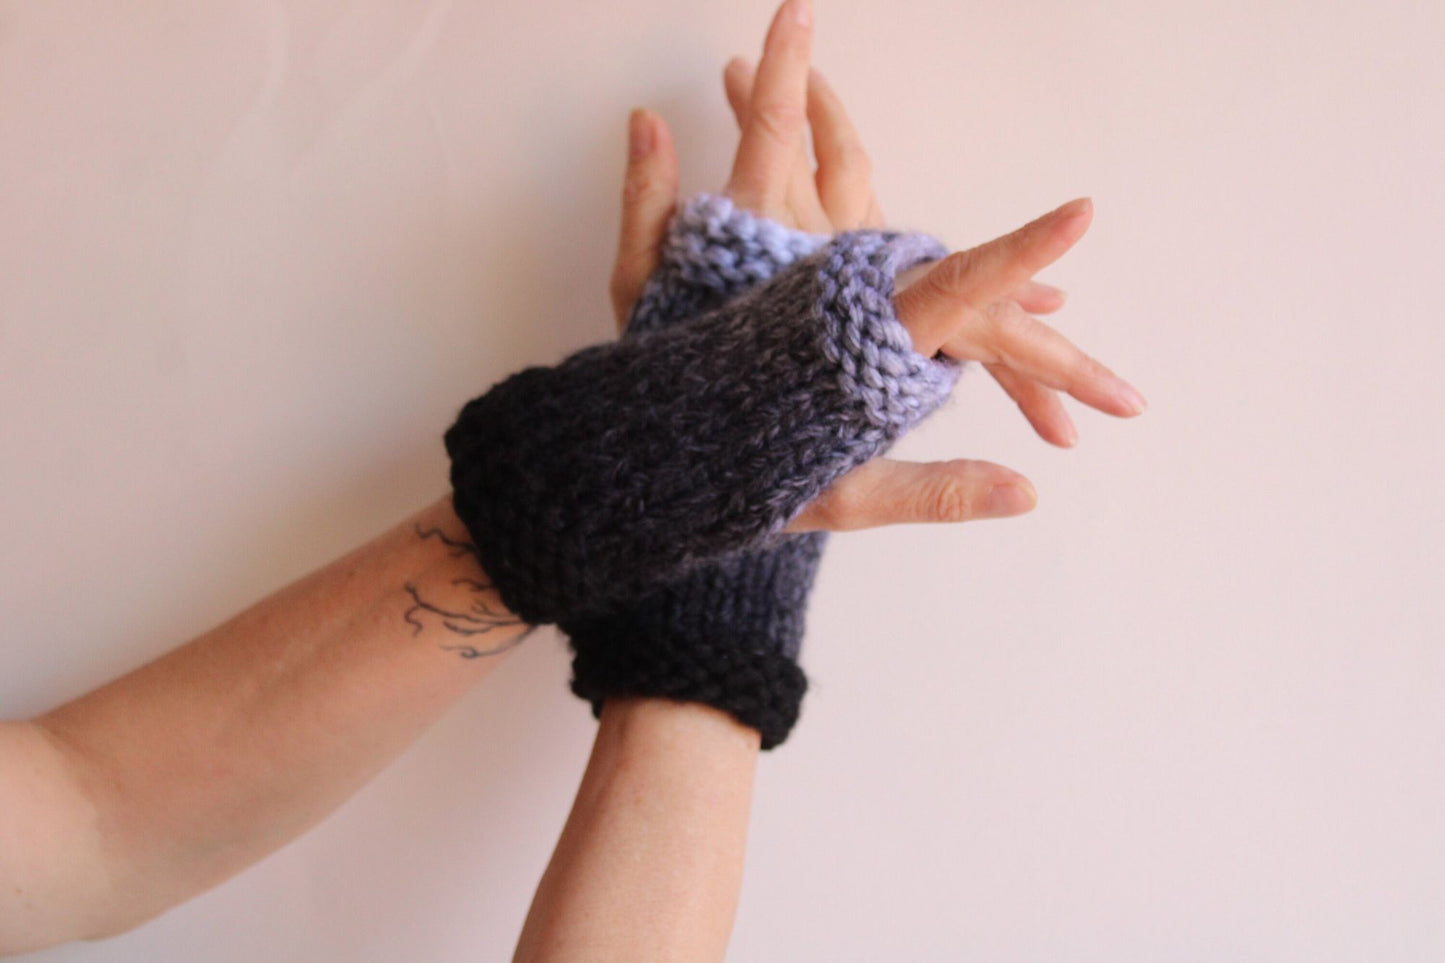 "Winter Ash" Hand Knit Fingerless Gloves, Armwarmers in Ombre Black, Gray and White